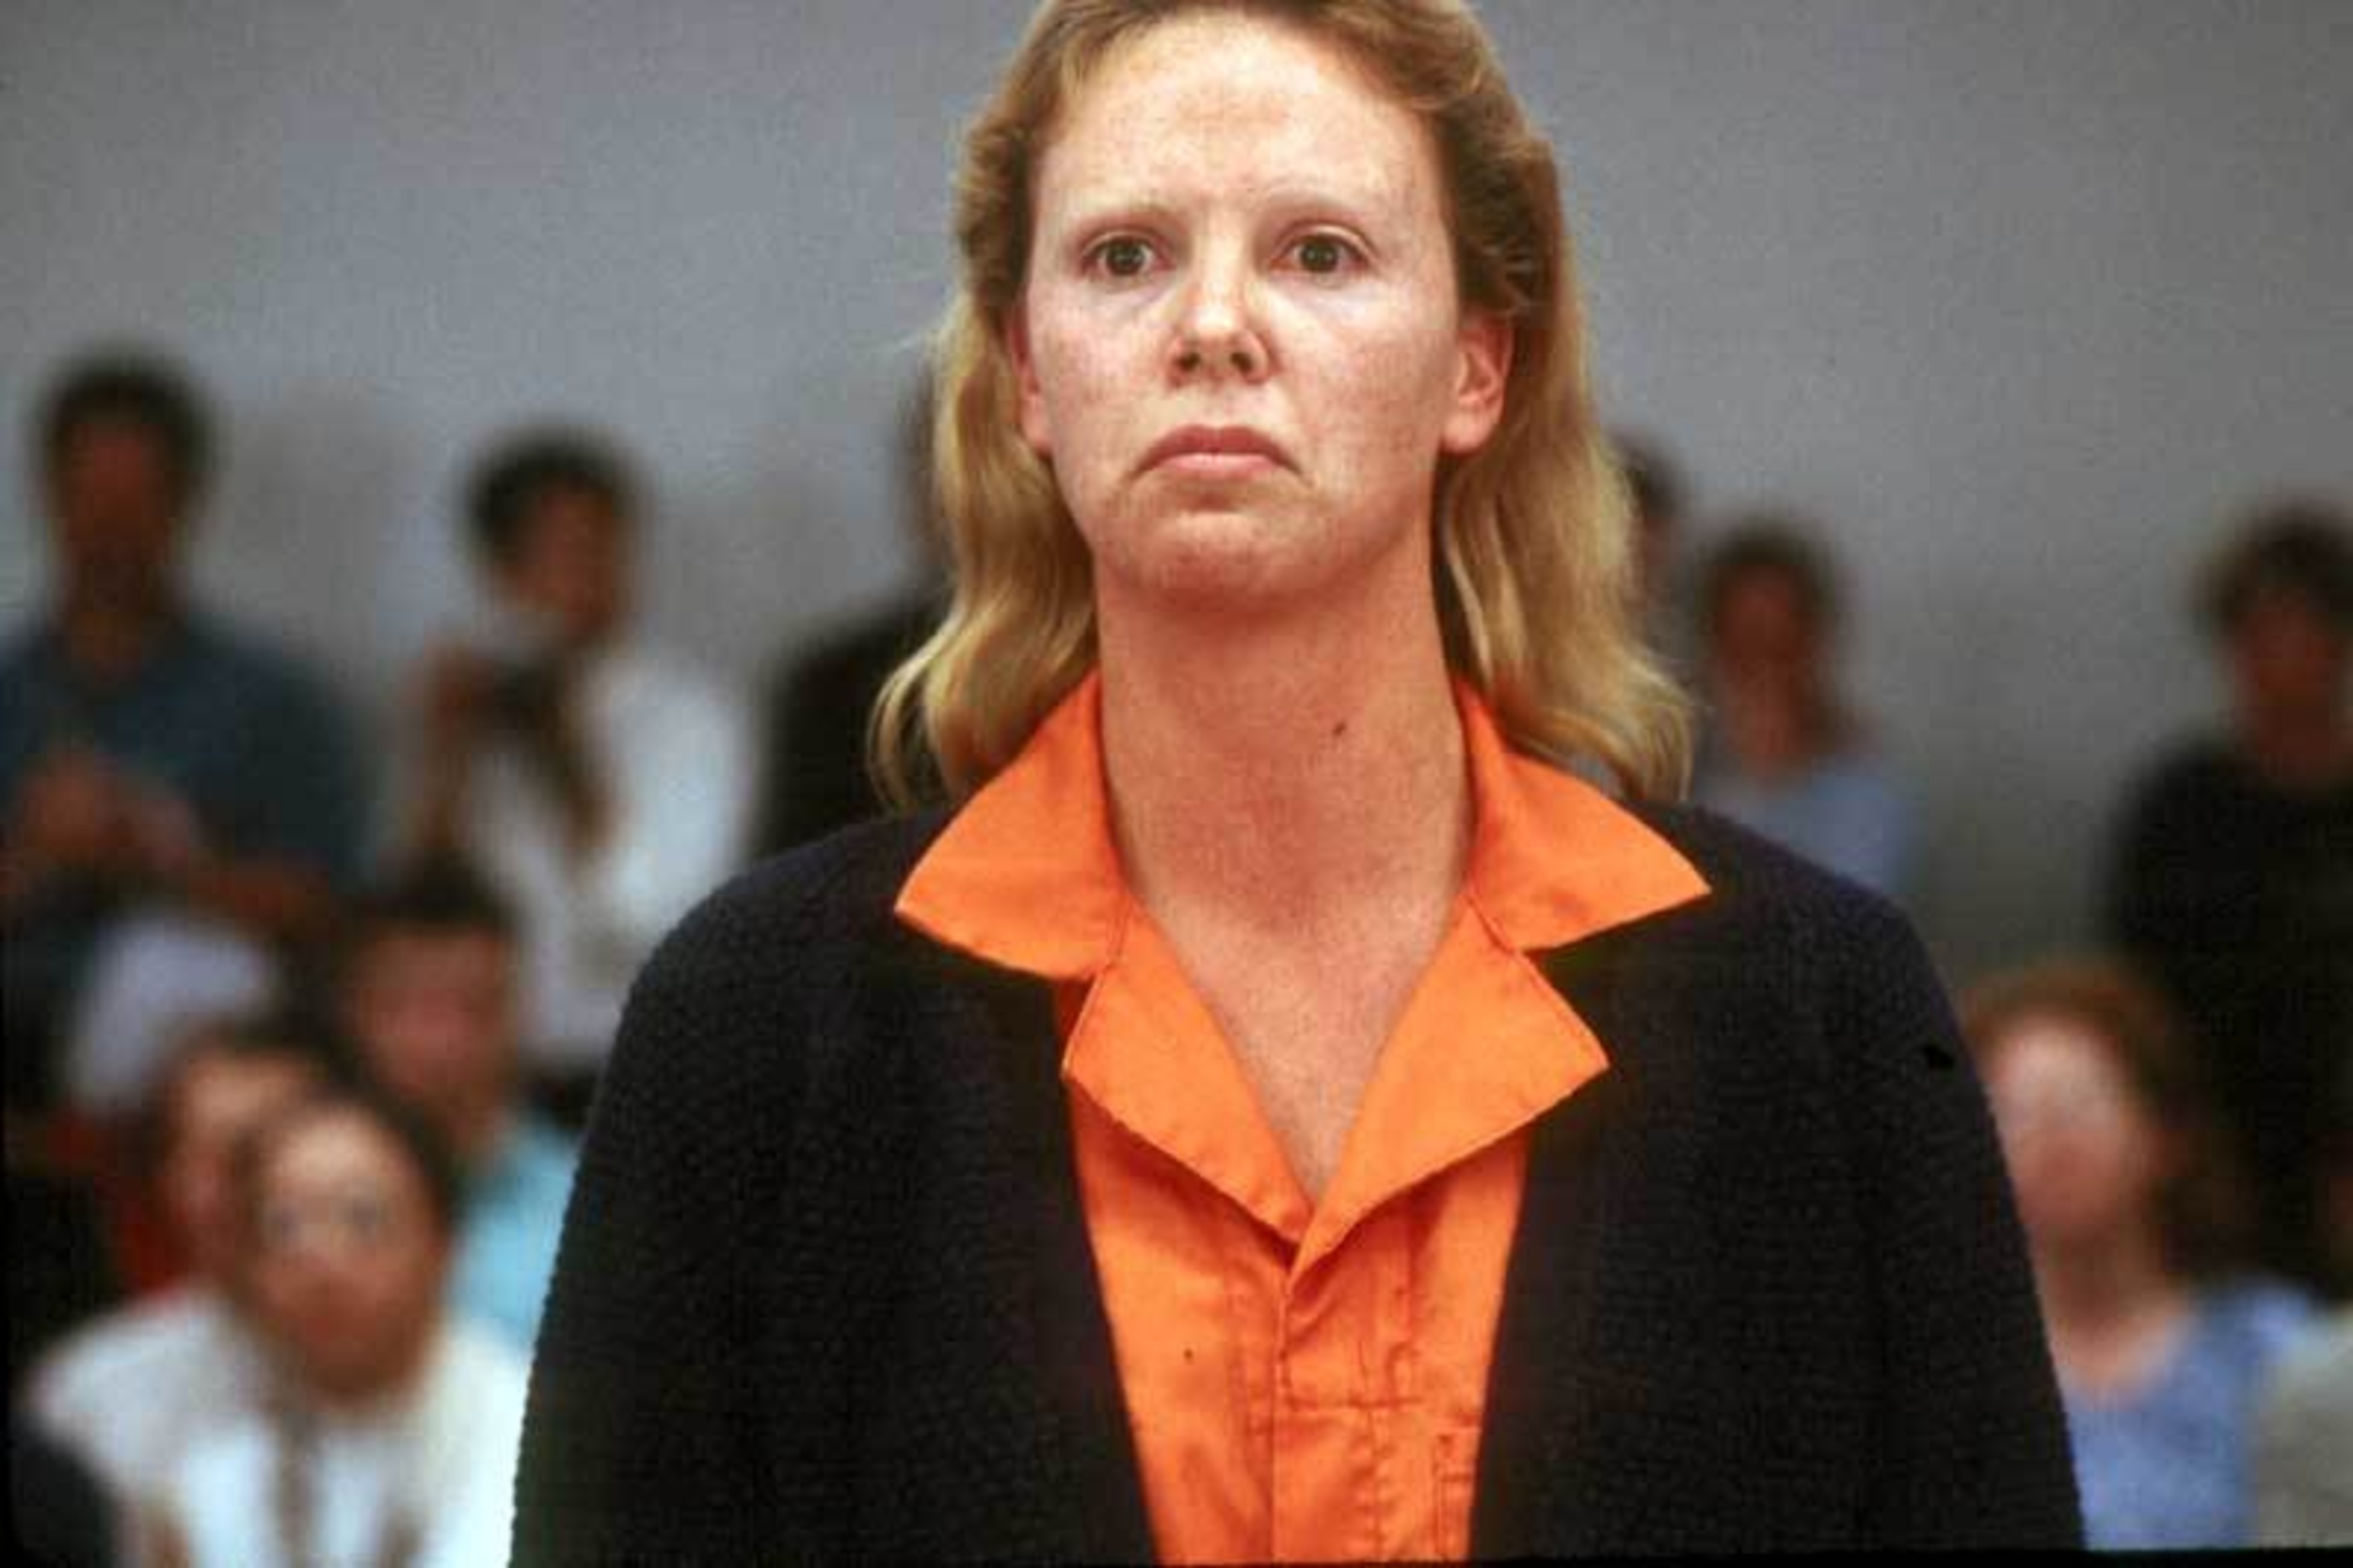 <p>Charlize Theron stuns in this Oscar-winning portrayal of notorious female serial killer Aileen Wuornos, who admitted to killing seven men in her time as a sex worker. Theron's performance is especially nuanced in "Monster," delving deep into Wuornos's traumatic childhood and adult life. </p><p>You may also like: <a href='https://www.yardbarker.com/entertainment/articles/actors_you_didnt_know_were_also_musicians_040424/s1__30421316'>Actors you didn't know were also musicians</a></p>